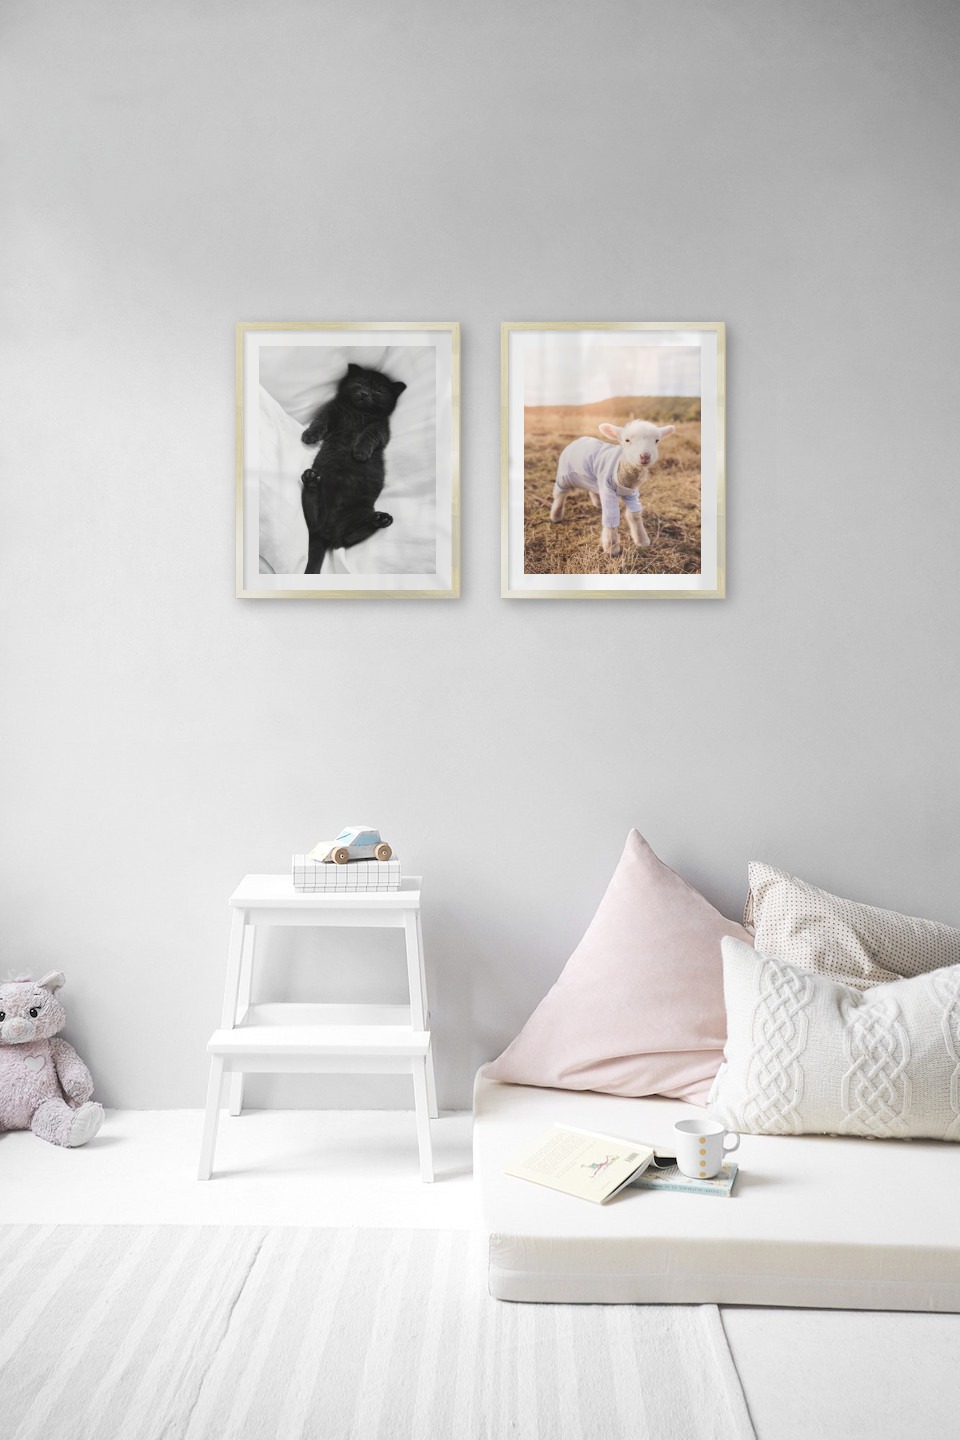 Gallery wall with picture frames in gold in sizes 40x50 with prints "Cat in bed" and "Lamb"